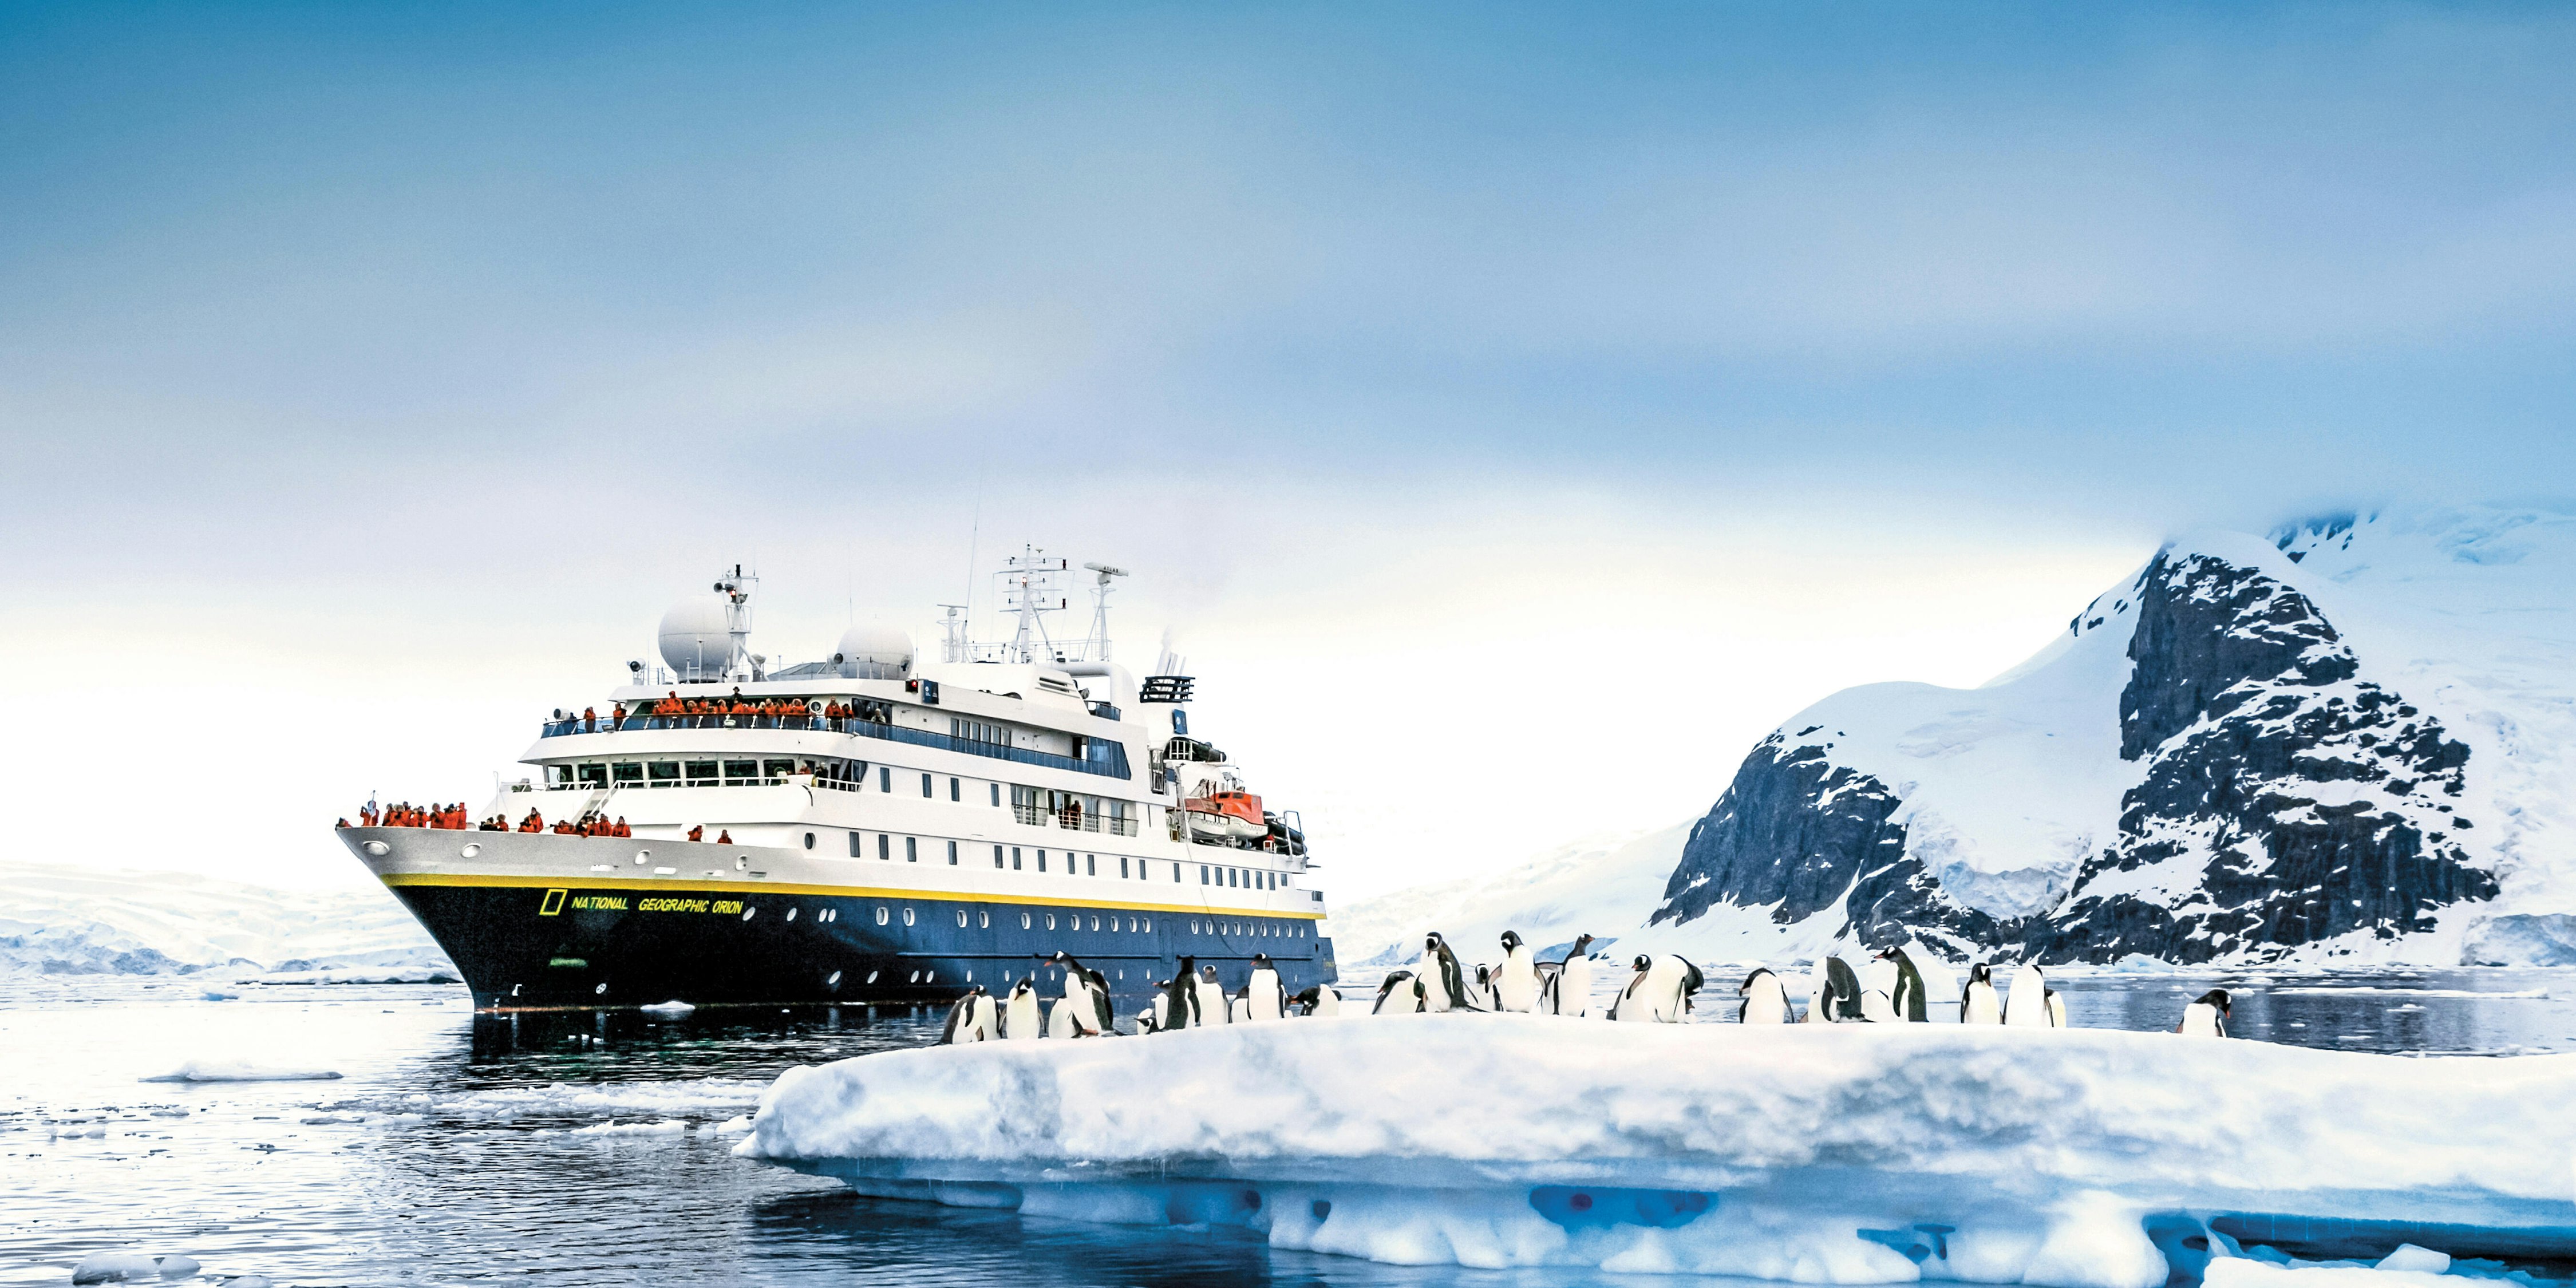 antarctic cruises from south america